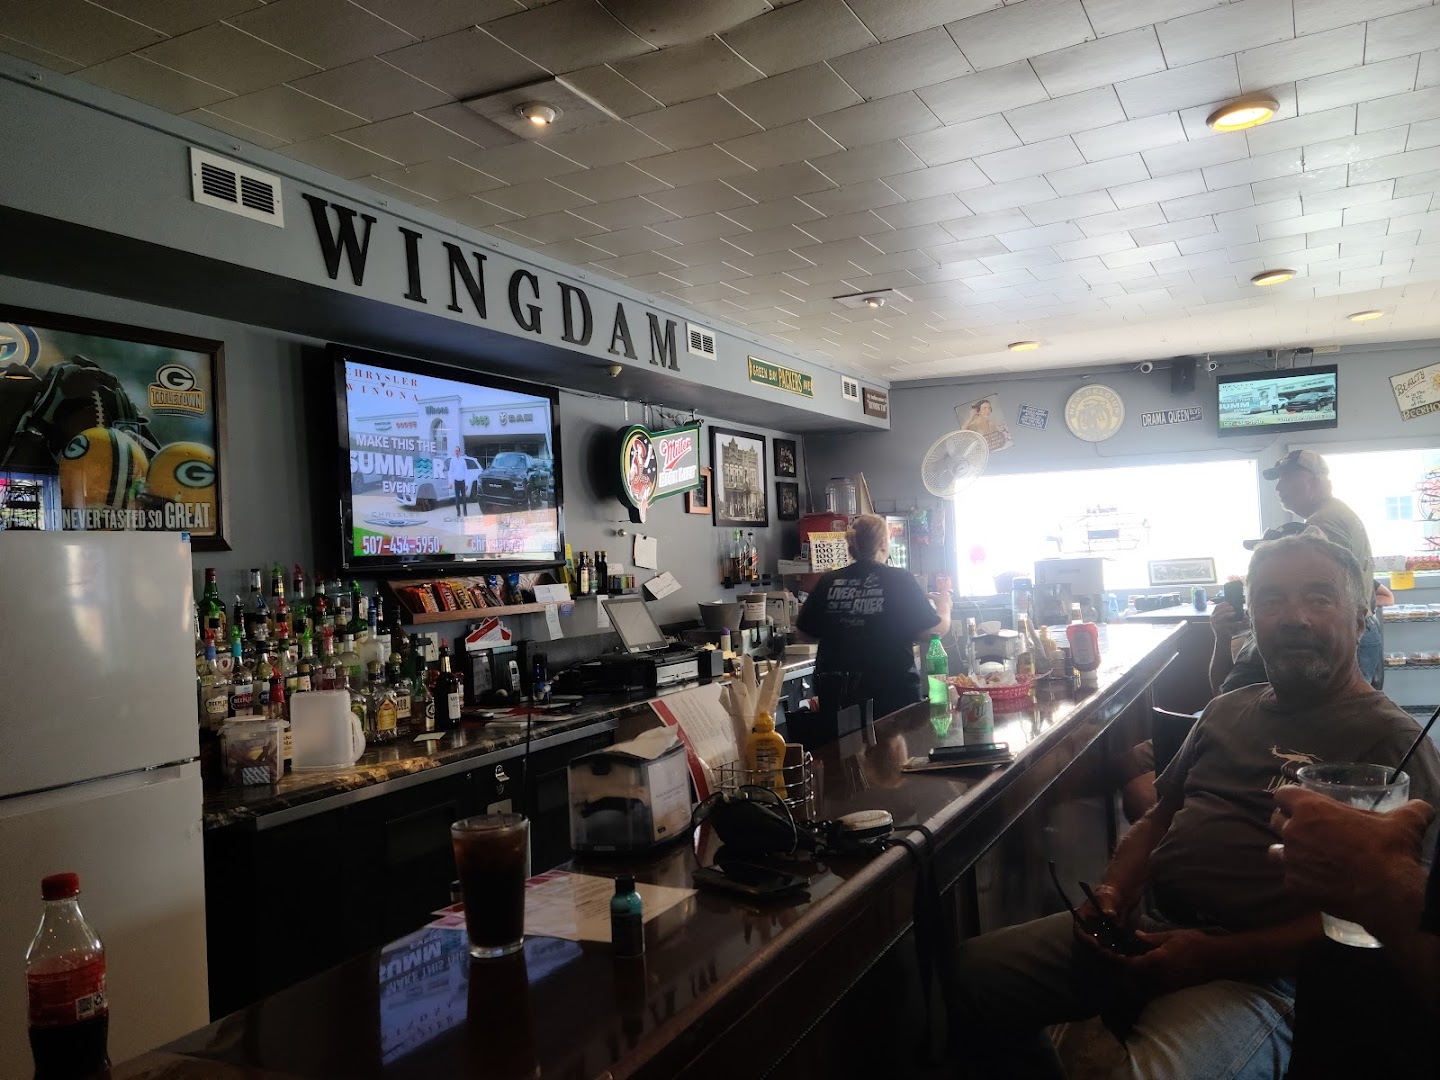 Wing Dam Saloon & Grill